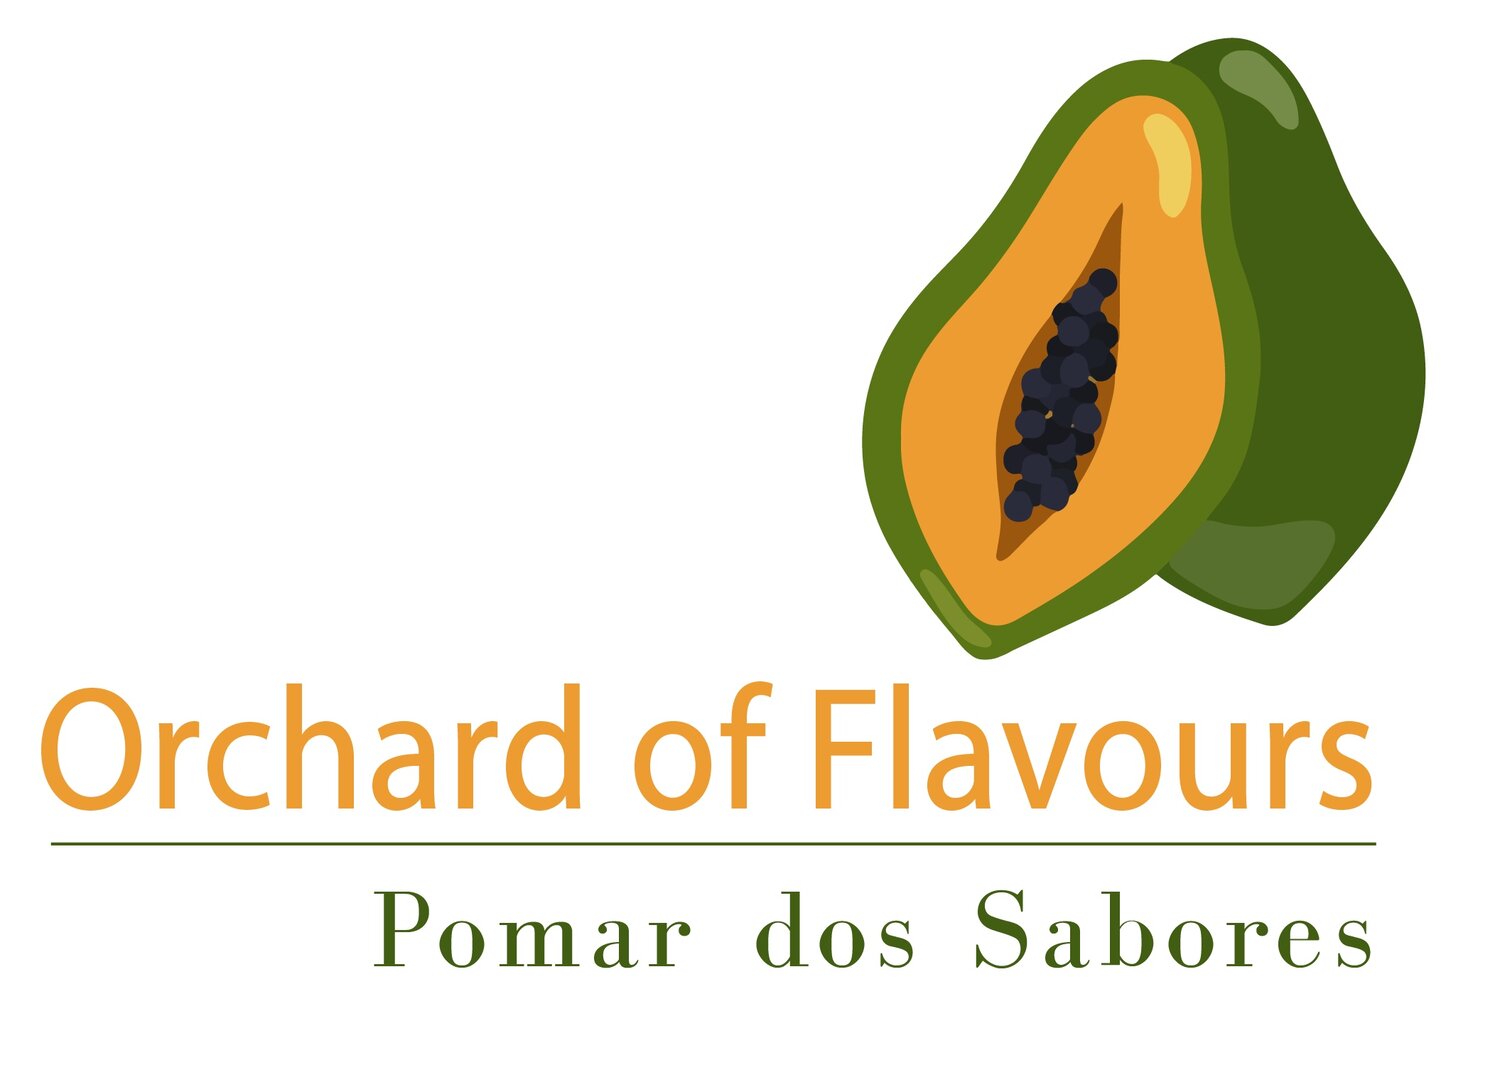 Orchard of Flavours